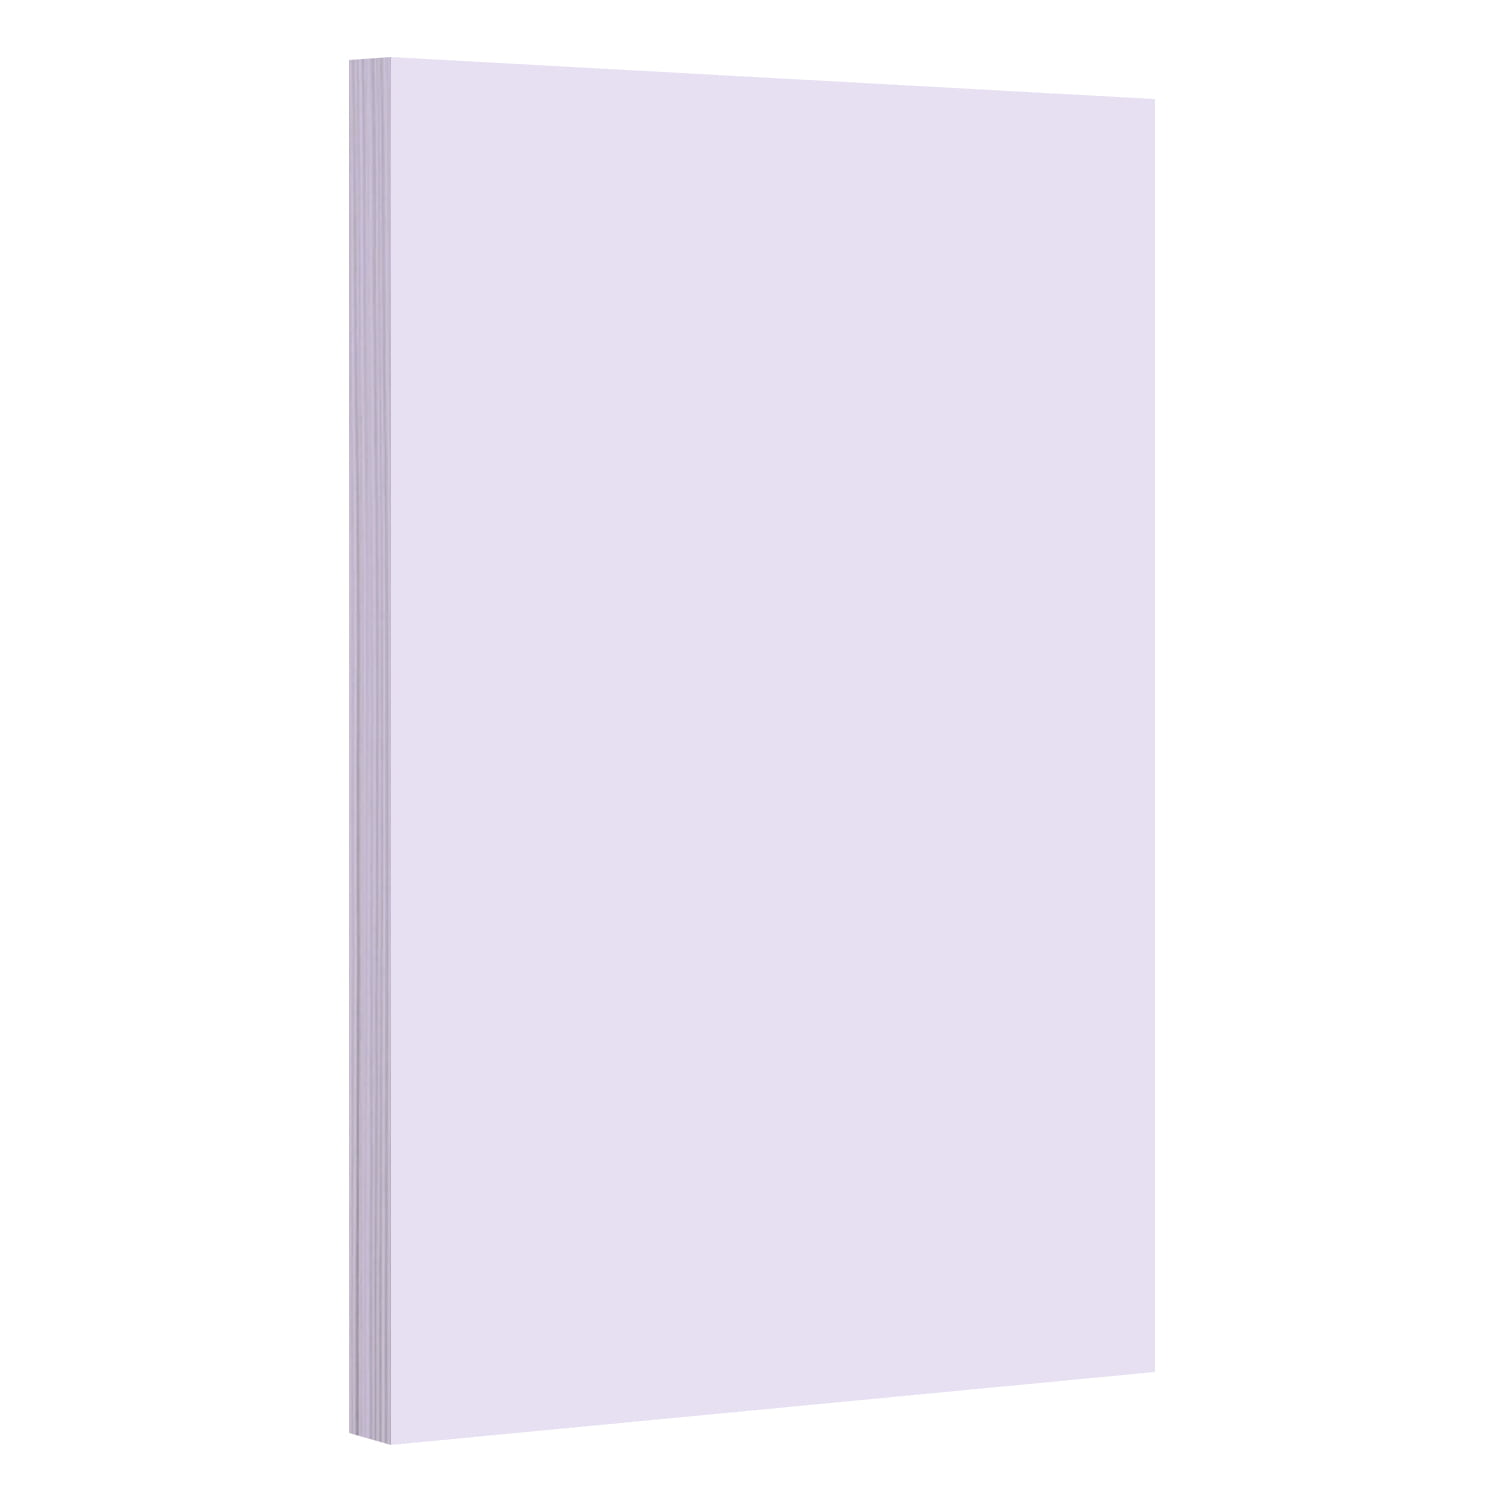 Pastel Color Card Stock Paper, 50 Per Pack, 67lb Vellum Bristol  Cardstock, Perfect for School Supplies, Holiday Crafting, Arts & Crafts, Acid & Lignin Free, Green